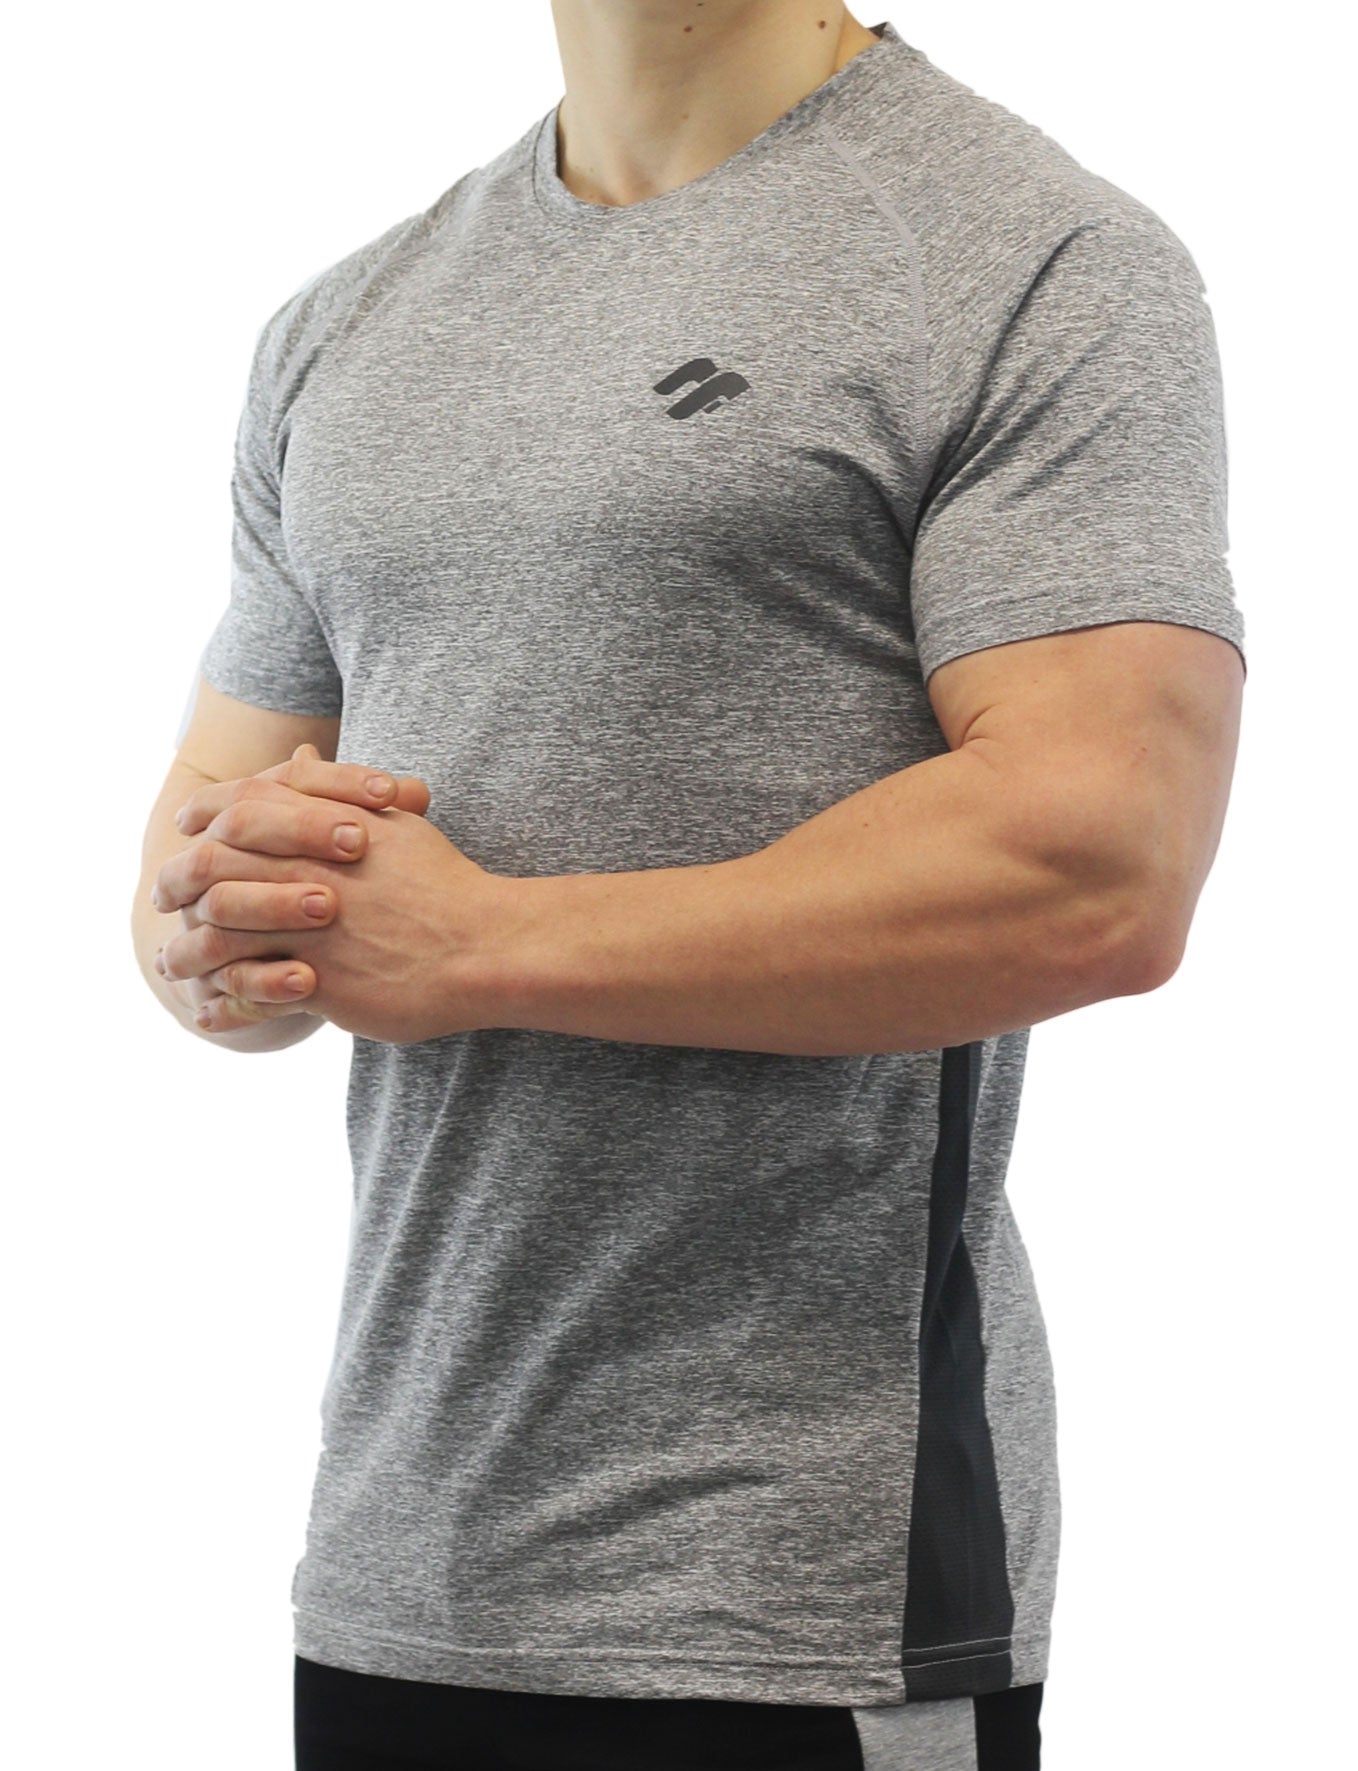 Mens Fitness T-Shirt, Gym Top, Gym Wear